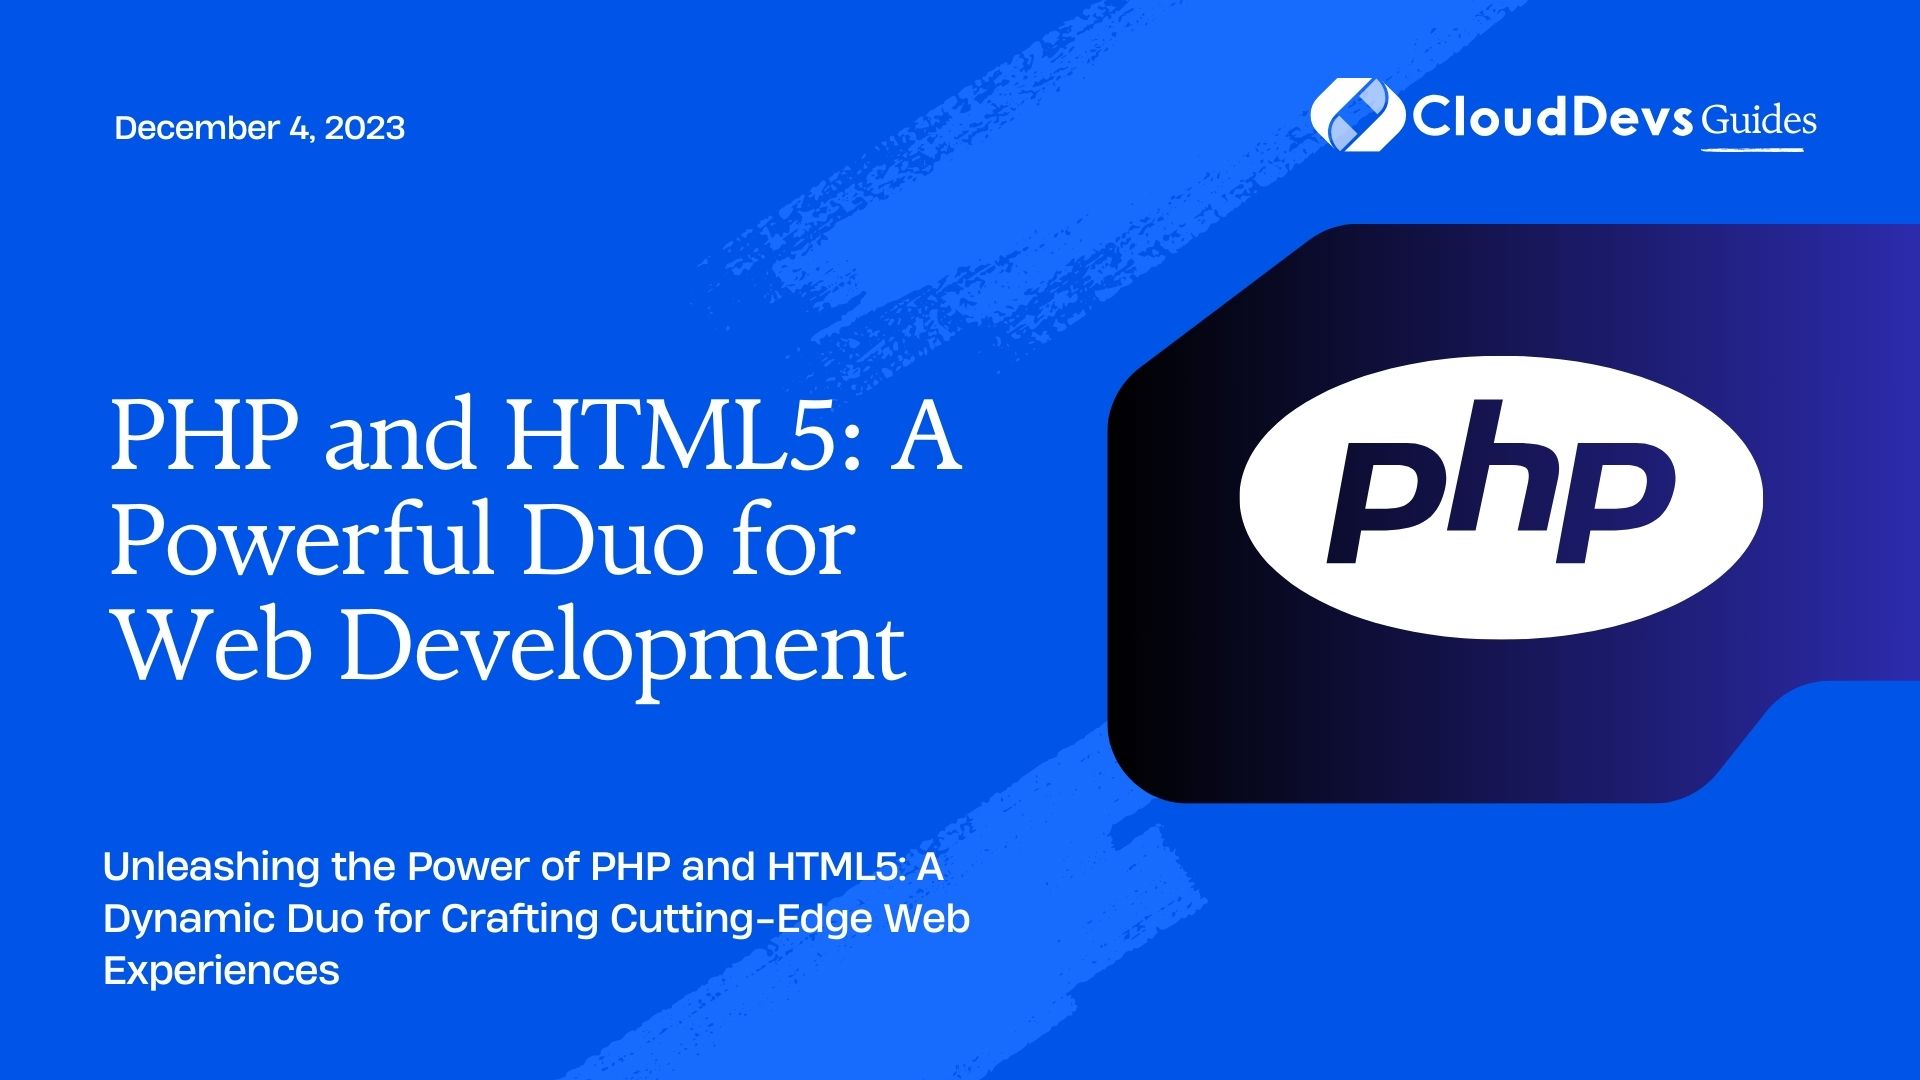 PHP and HTML5: A Powerful Duo for Web Development